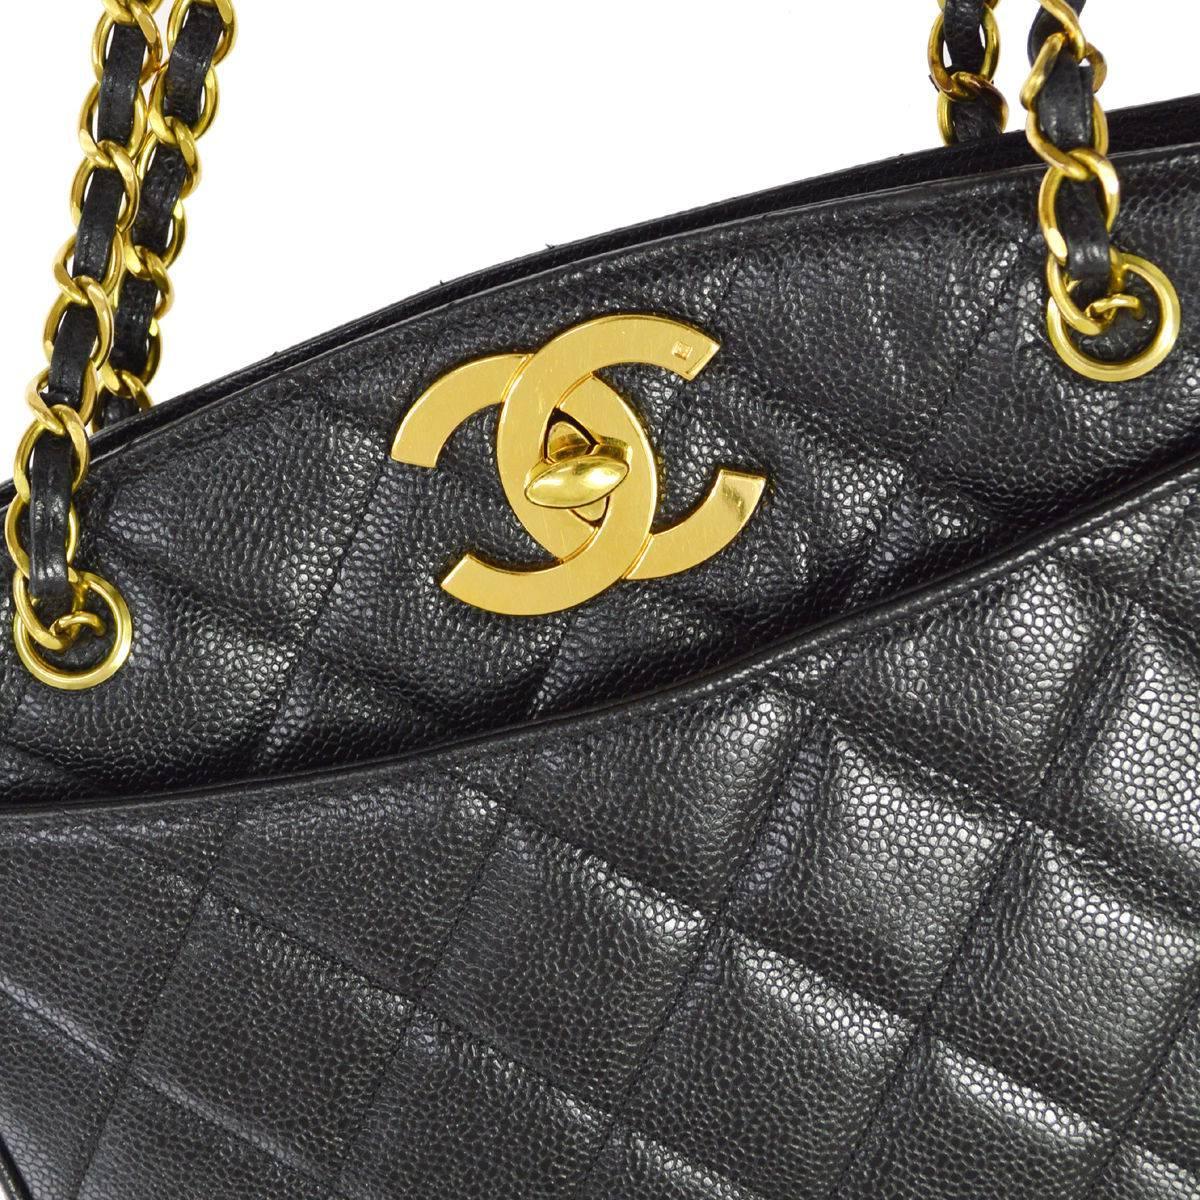 Chanel Rare Black Caviar Quilted Gold Shopper Carryall Tote Shoulder Bag 
Caviar
Gold tone hardware
Turnlock closure
Leather lining
Made in France
Date code present
Shoulder strap drop 13